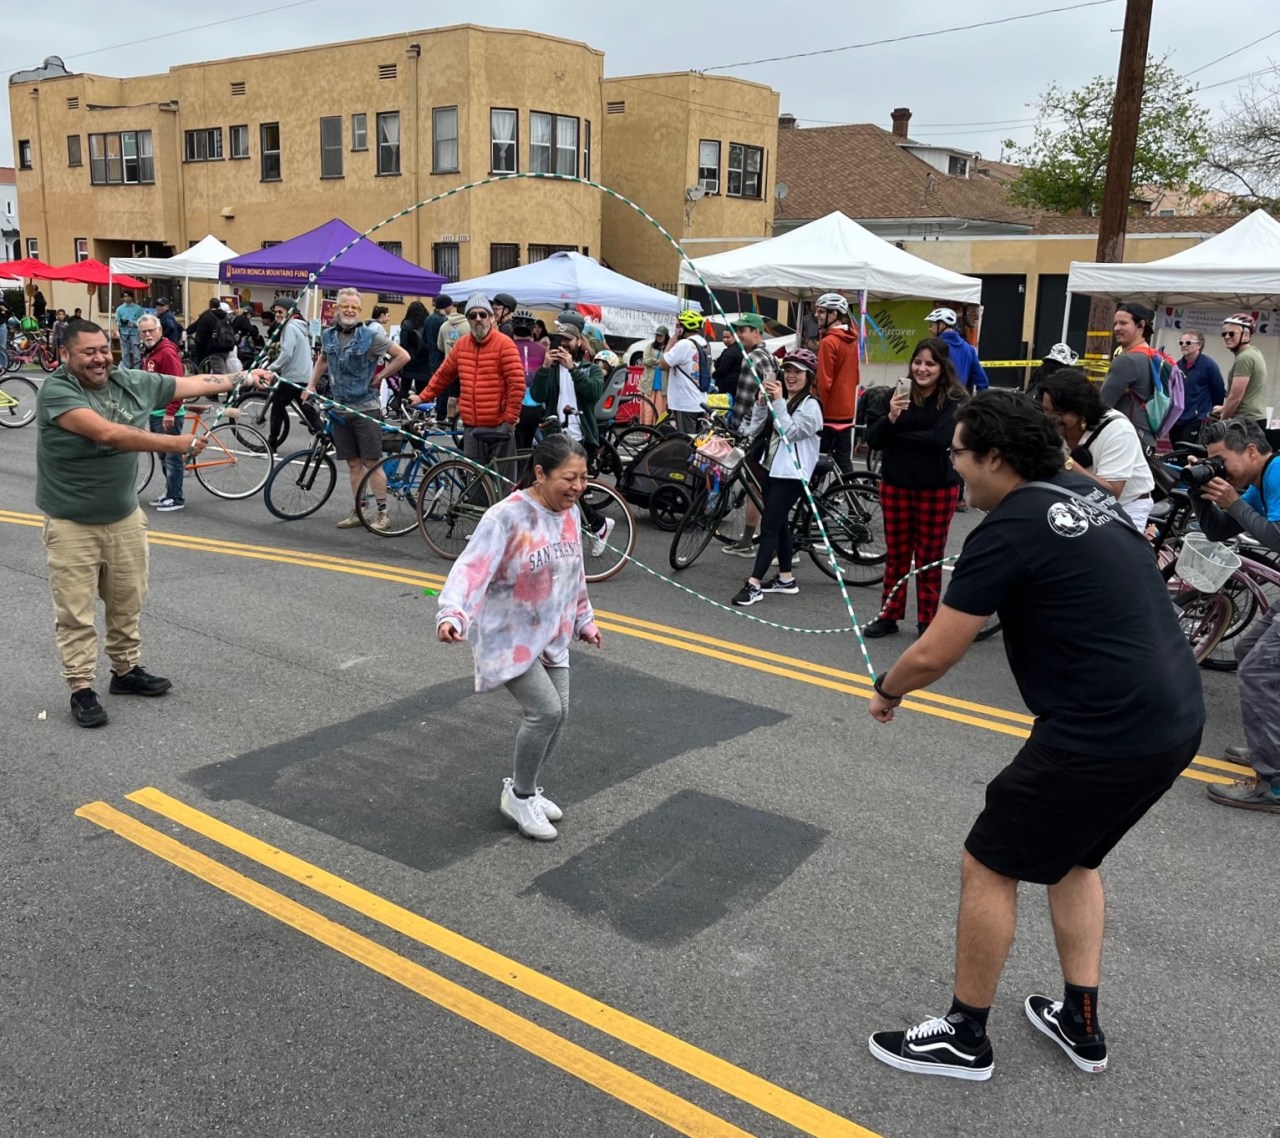 CicLAvia participants engaged in Double Dutch jumproping at the Arlington Heights hub